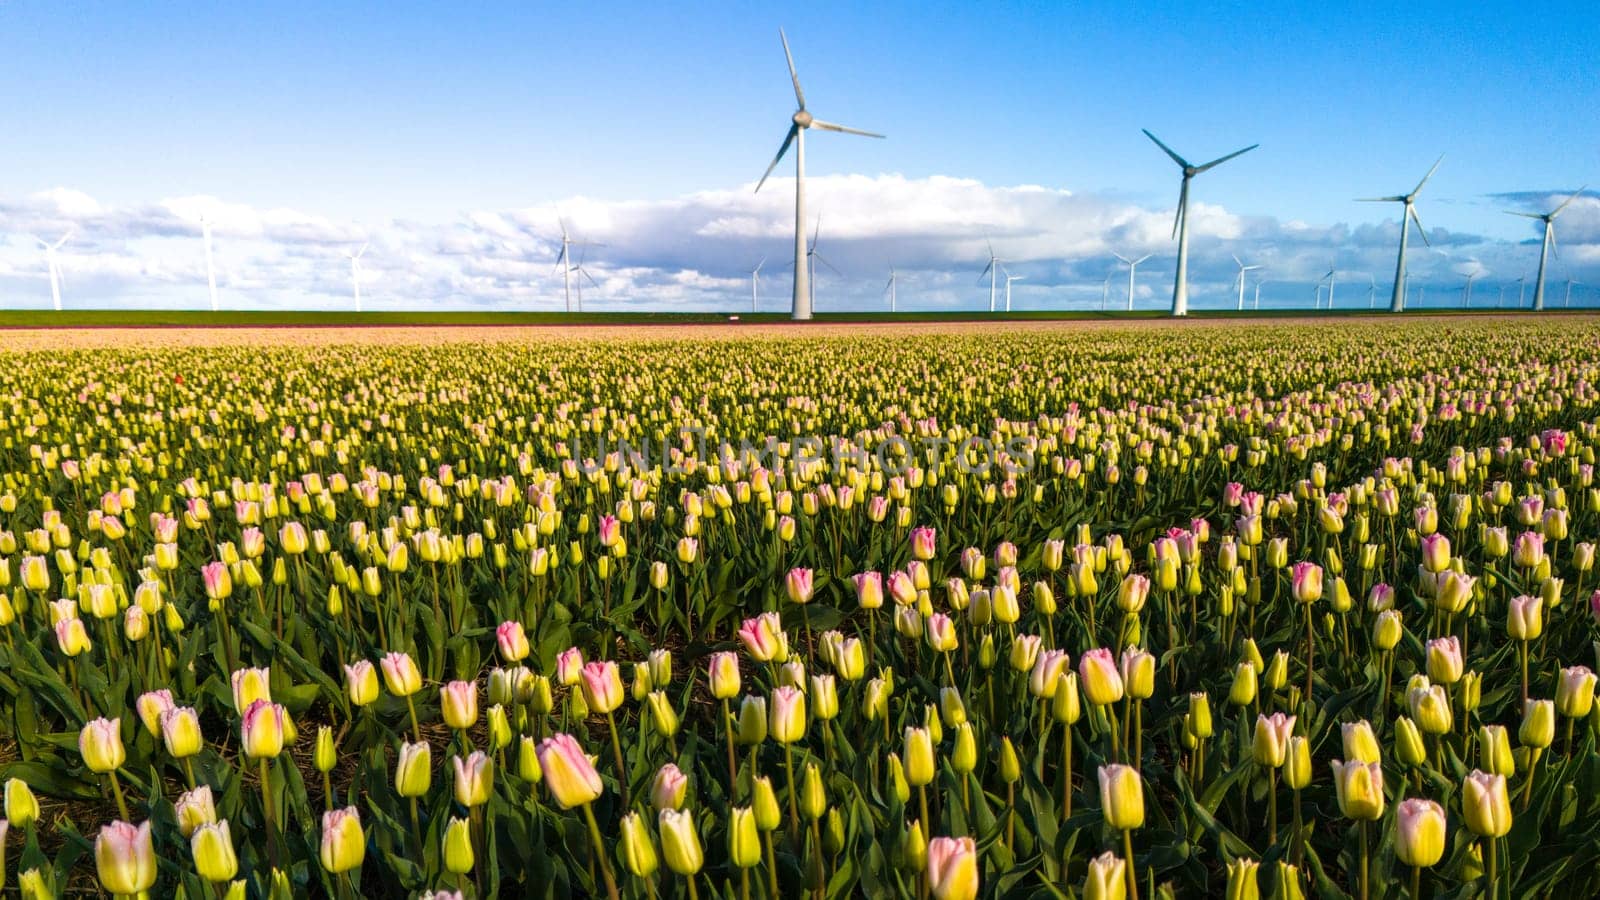 A vast field of colorful flowers sways gently in the breeze, with towering windmills in the background under a clear blue sky in the Netherlands in Spring by fokkebok